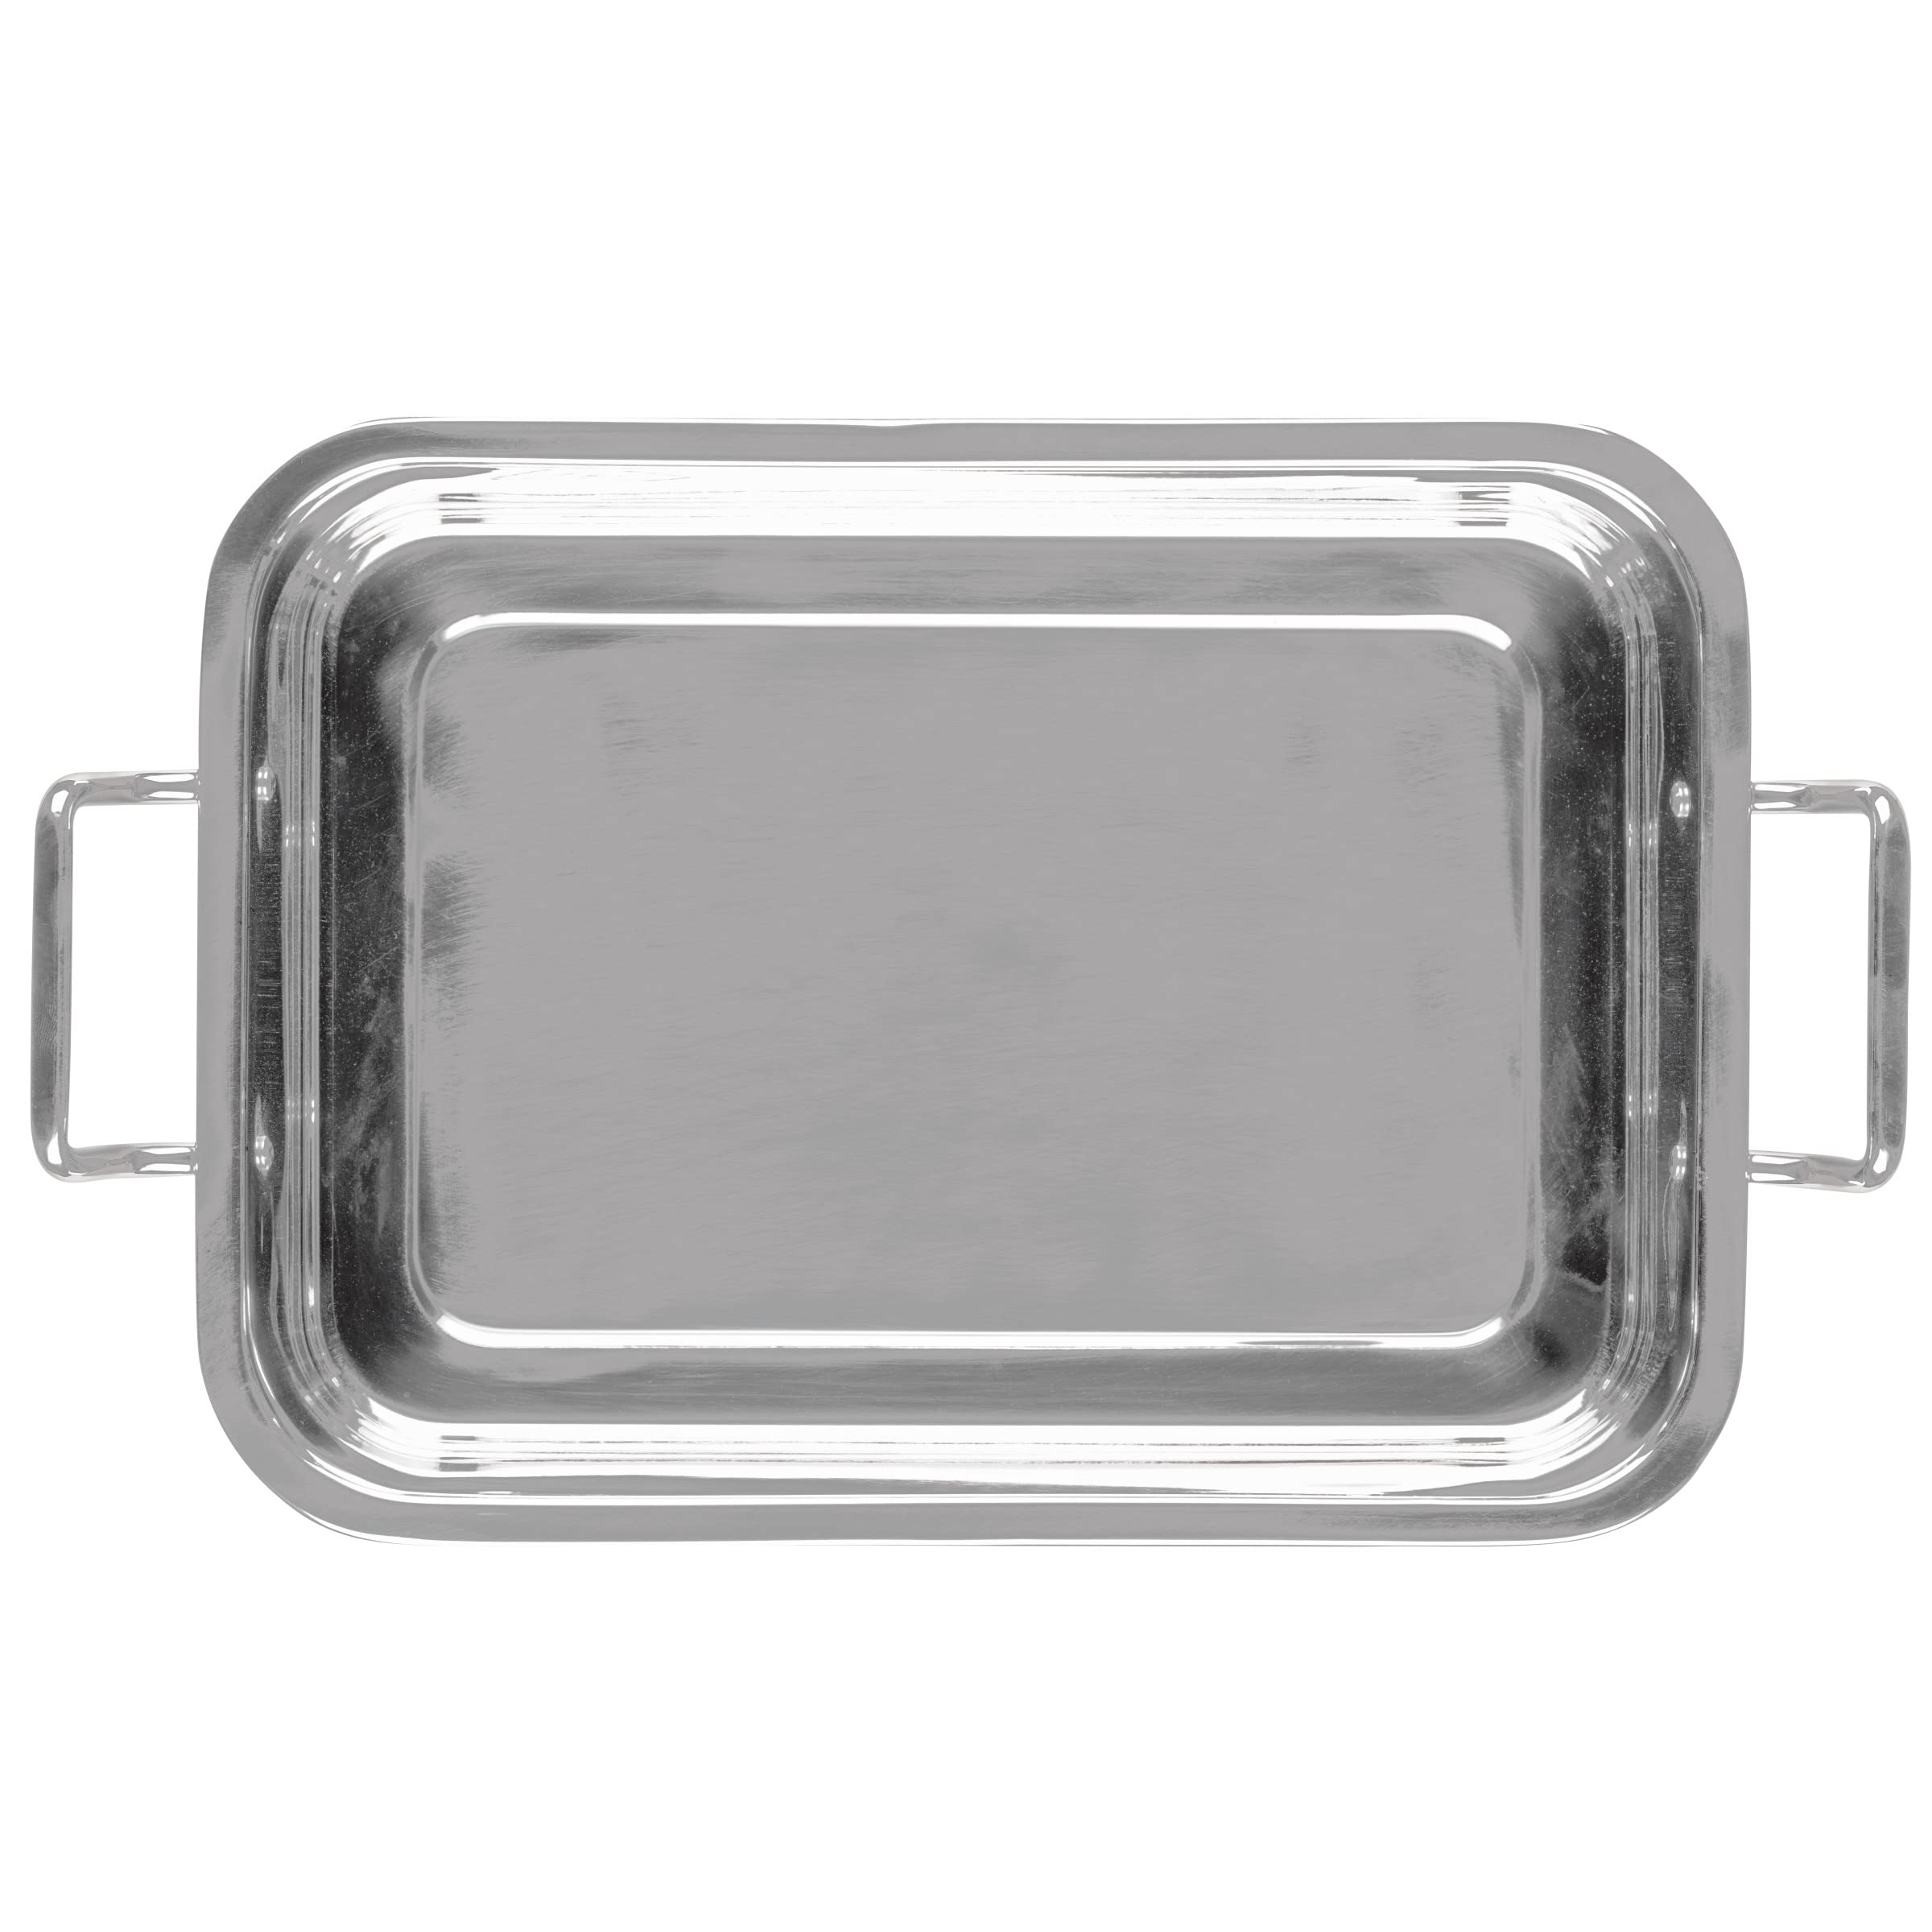 Farberware Classic Traditions Stainless Steel Roaster/Roasting Pan with Rack, 17 Inch x 12.25 Inch